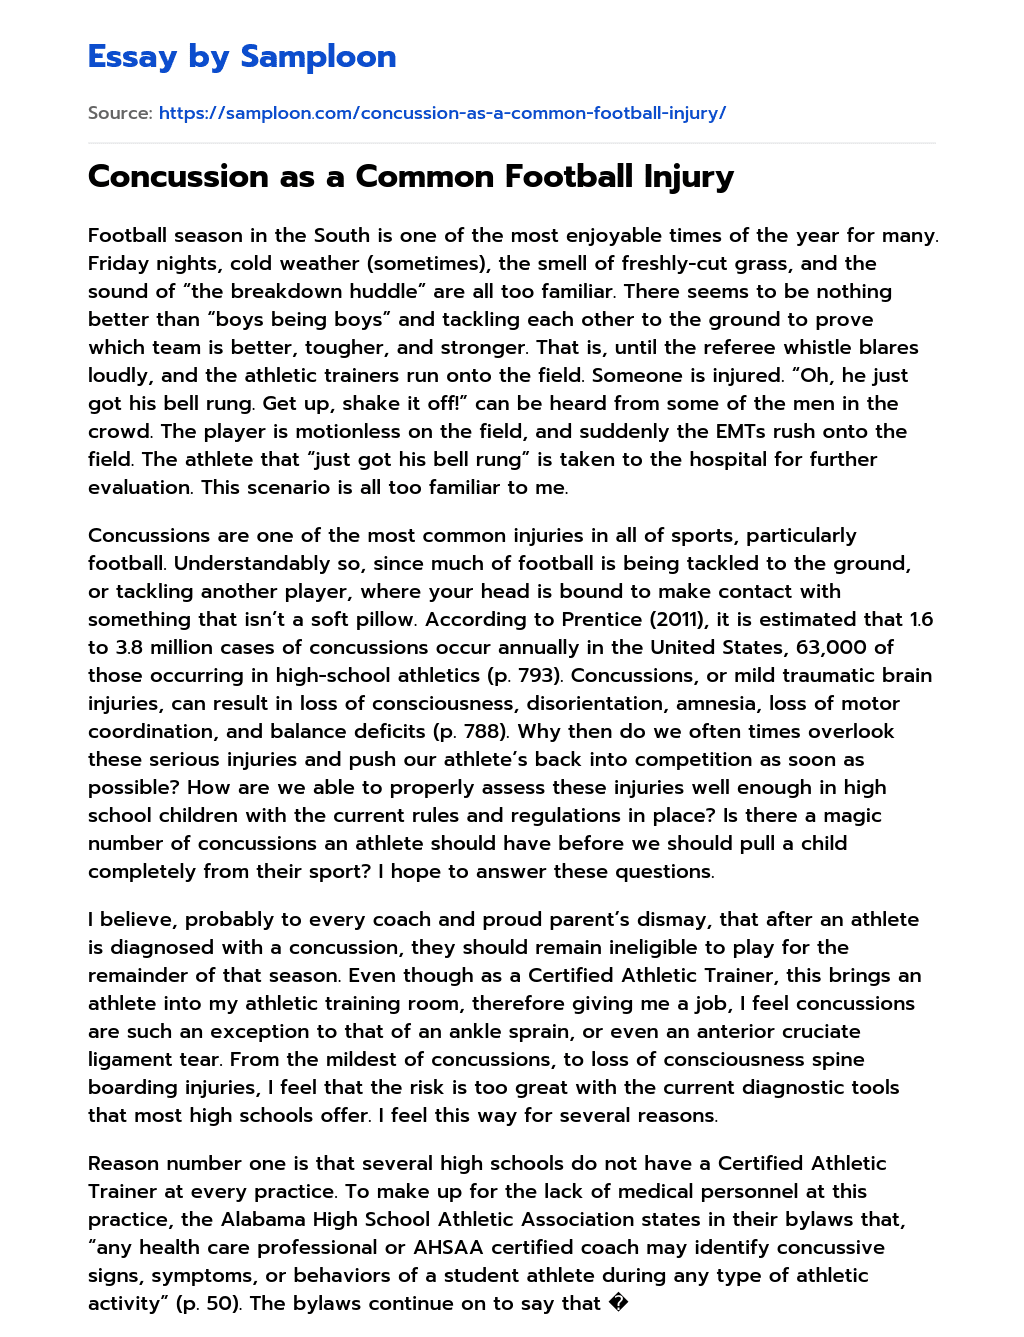 Concussion as a Common Football Injury essay